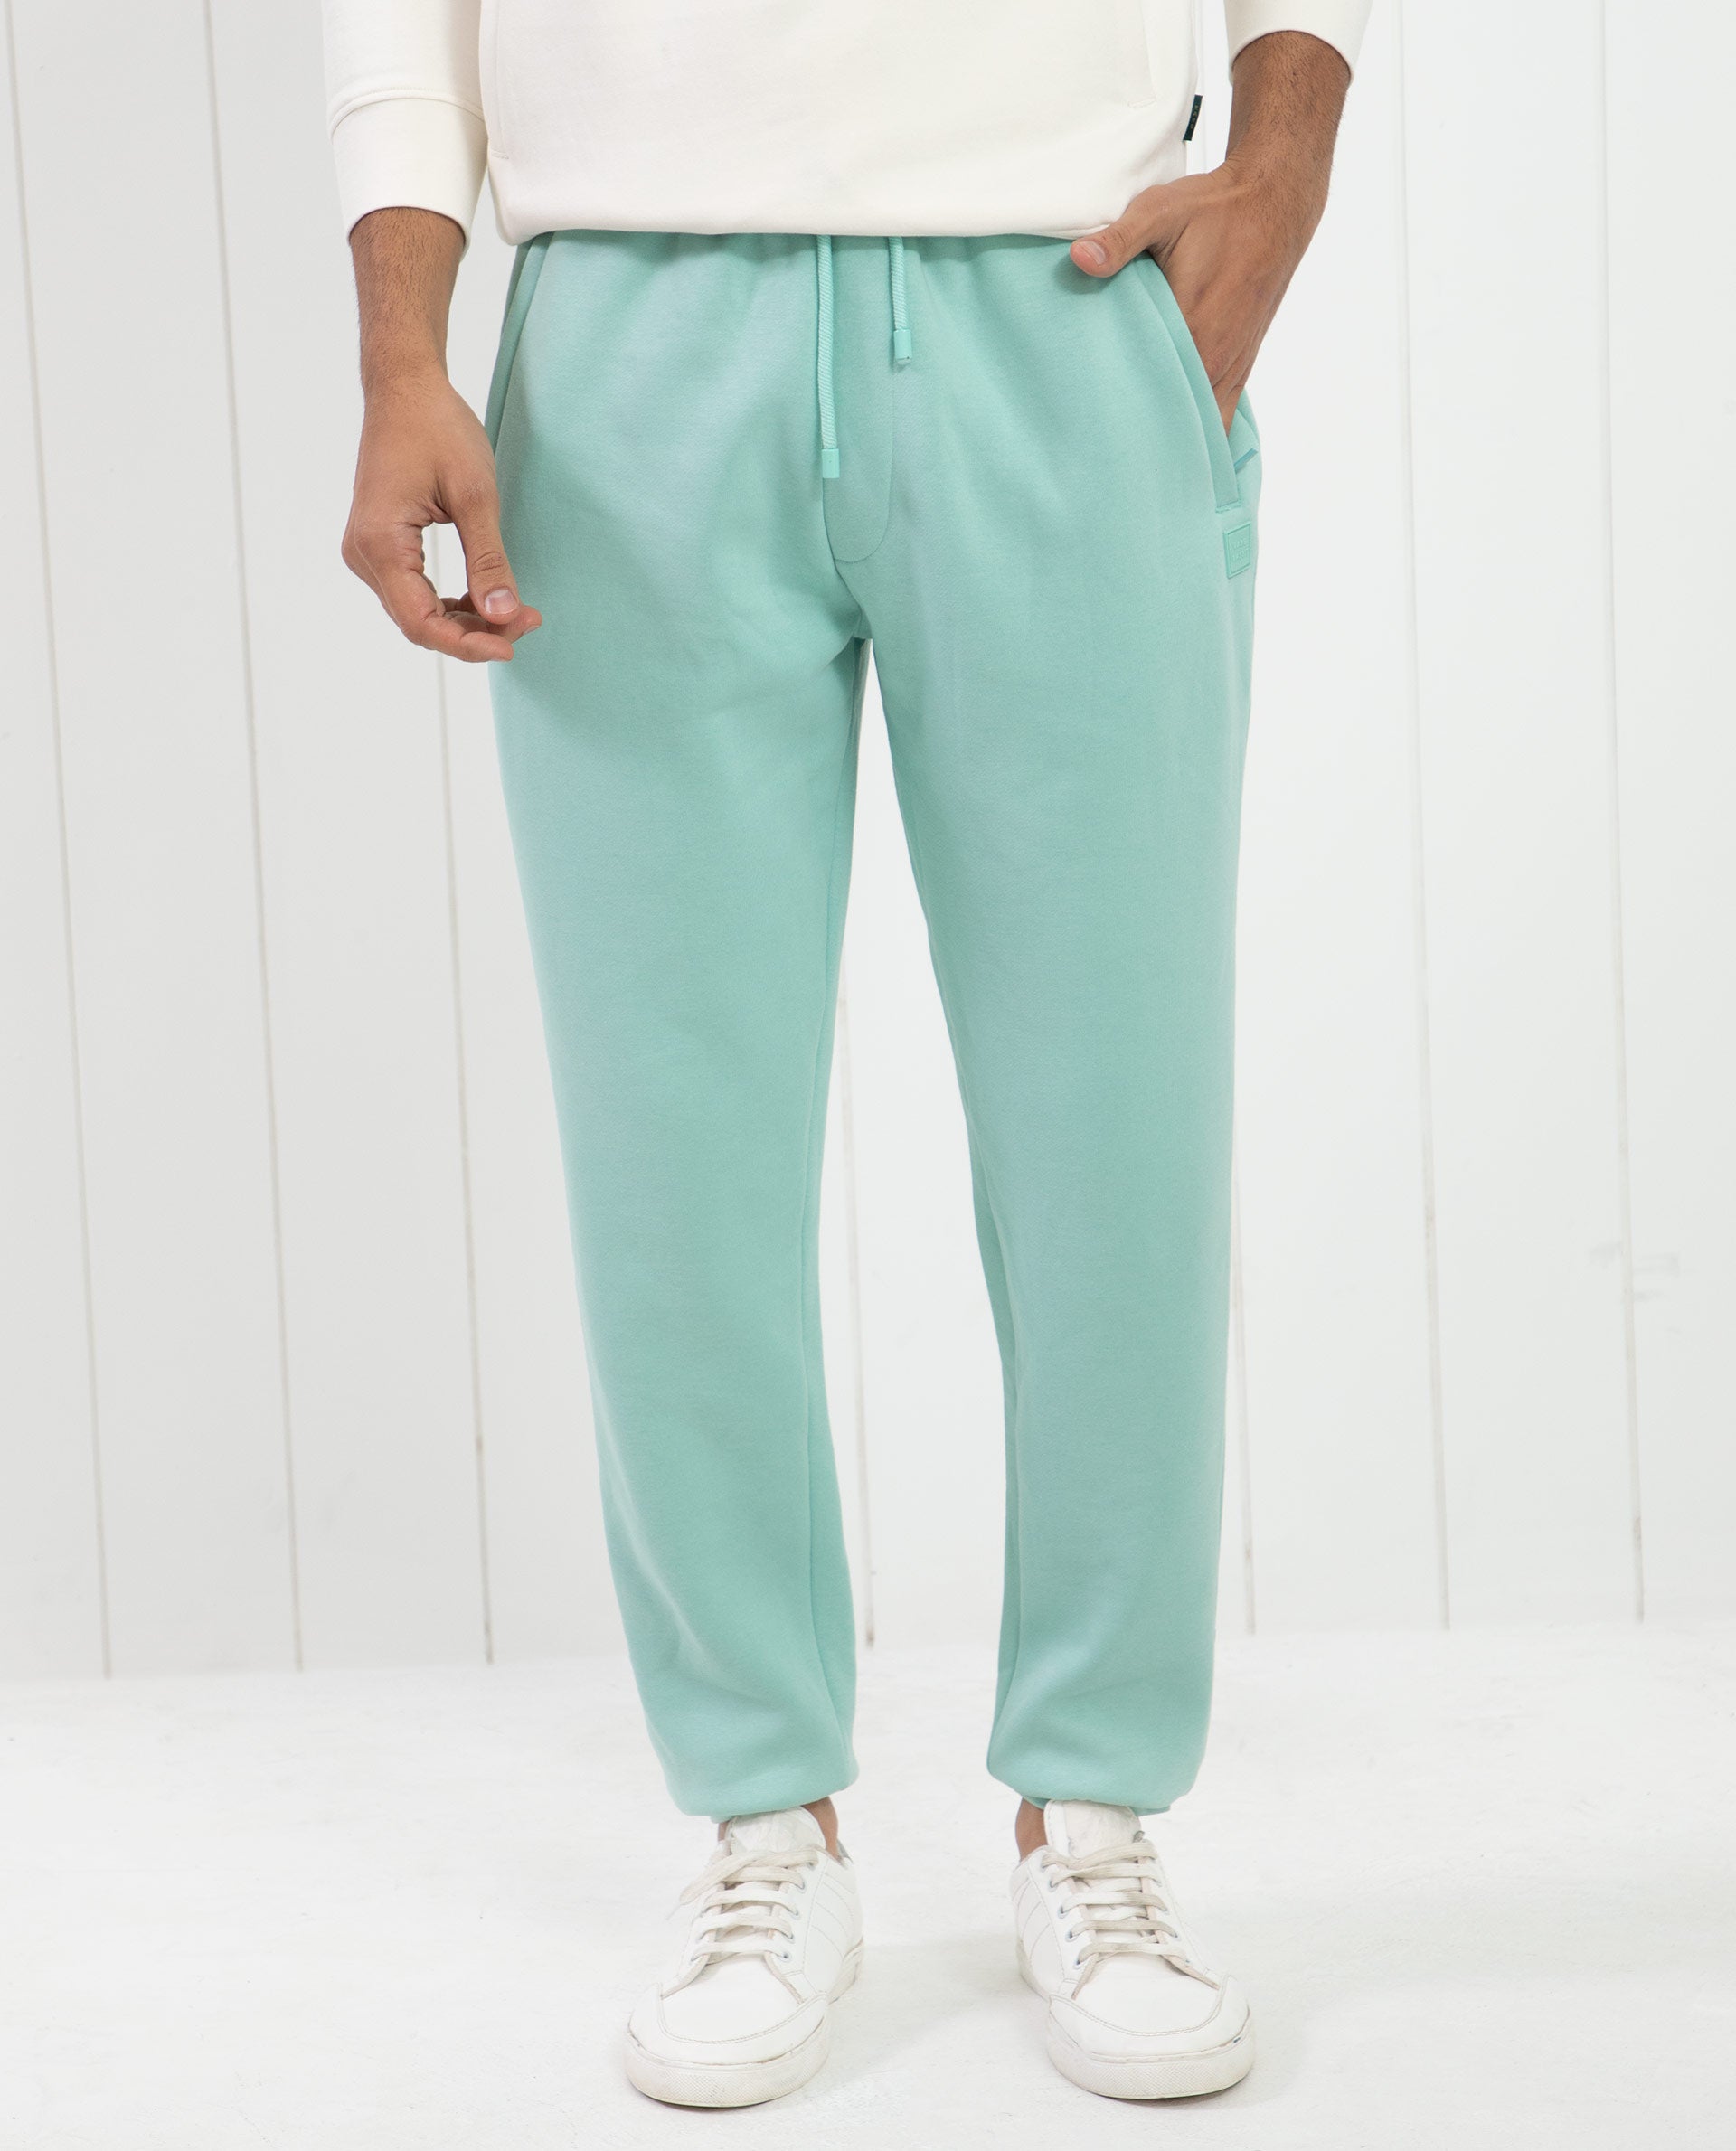 Chic Light Olive Green Joggers - Trendy Pants – Shop the Mint